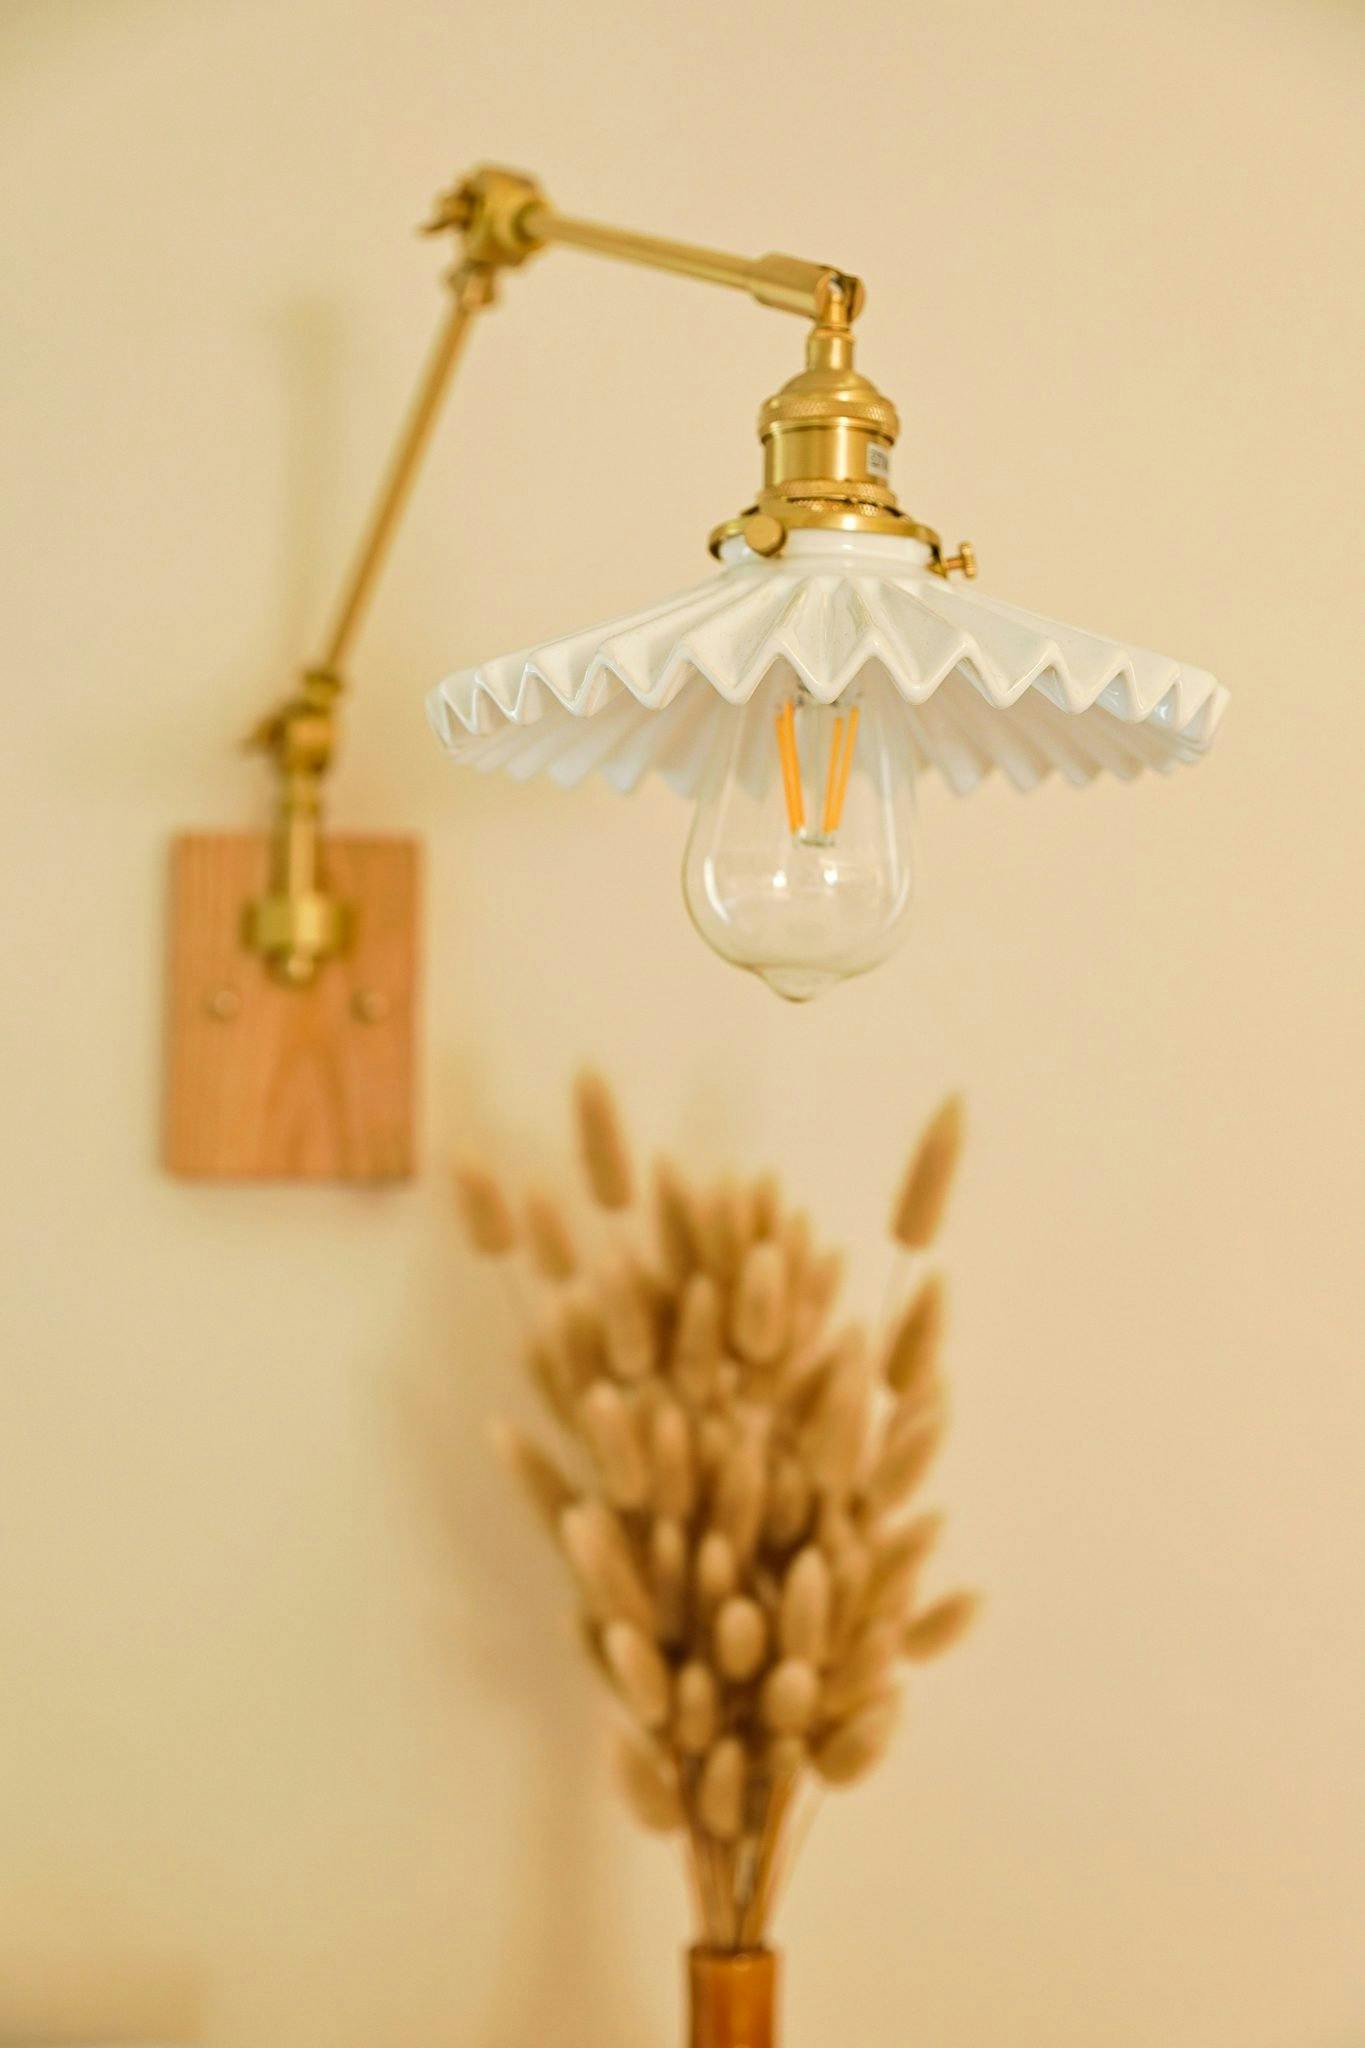 Décor: arm sconce and hanging lamp with dried flowers